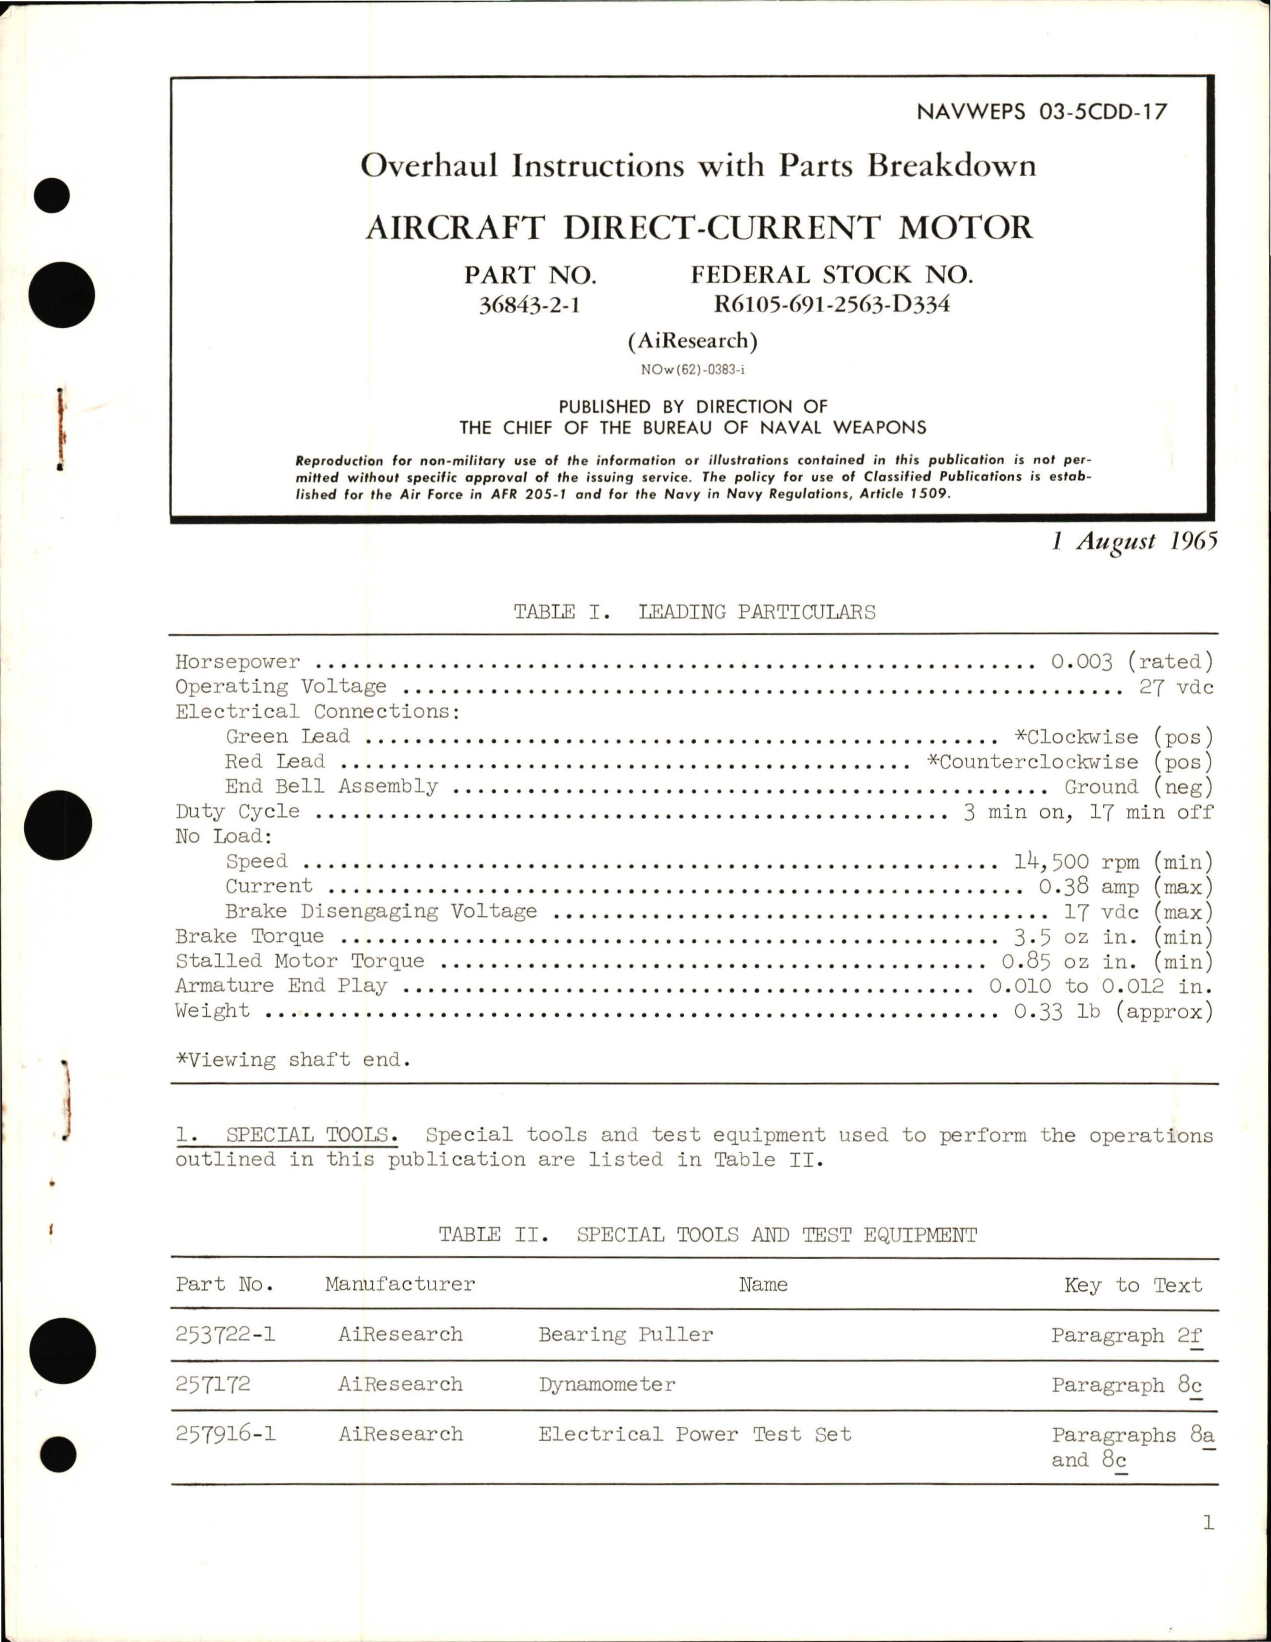 Sample page 1 from AirCorps Library document: Overhaul Instructions with Parts Breakdown for Aircraft Direct Current Motor - Part 36843-2-1